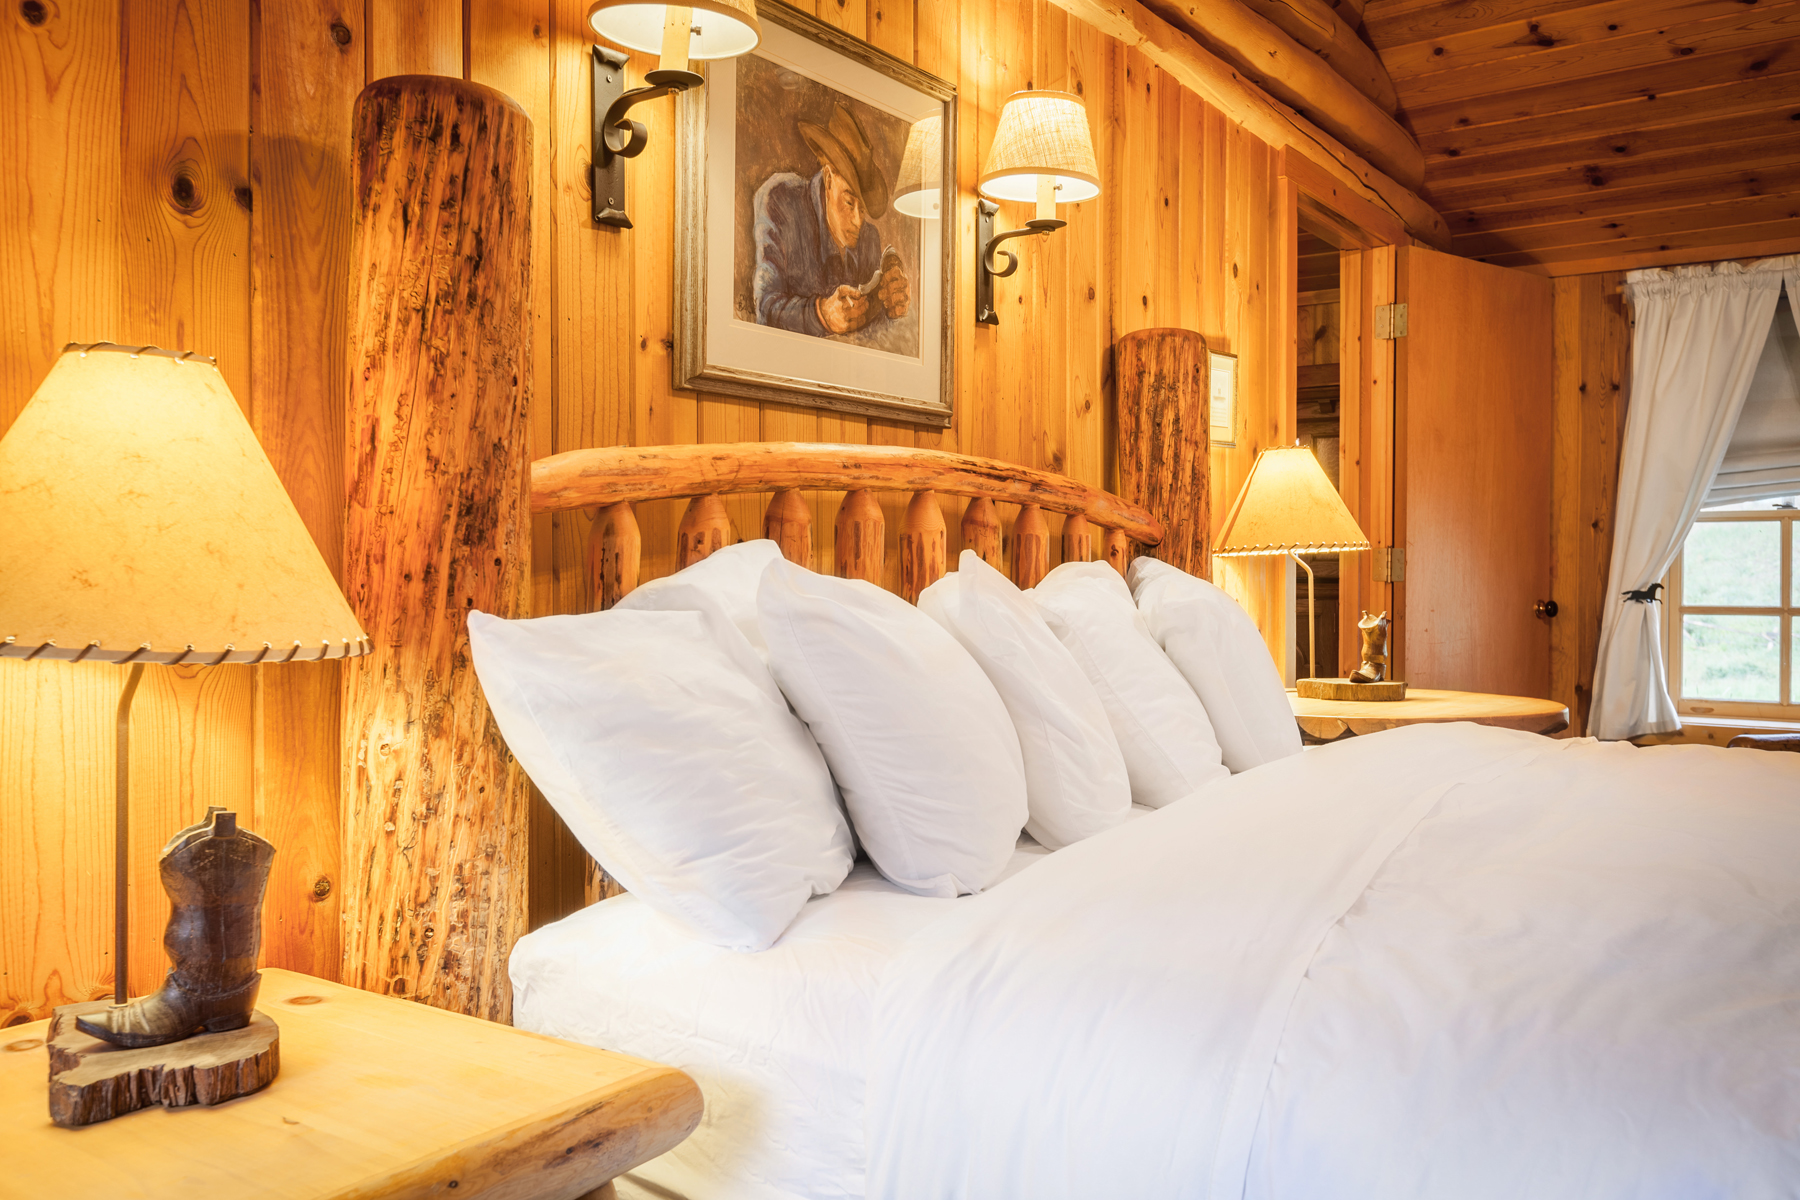 Plush goose down comforter-covered beds are in all rooms and cabins at Wyoming’s secluded and exclusive Brooks Lake Lodge for a luxurious slumber.